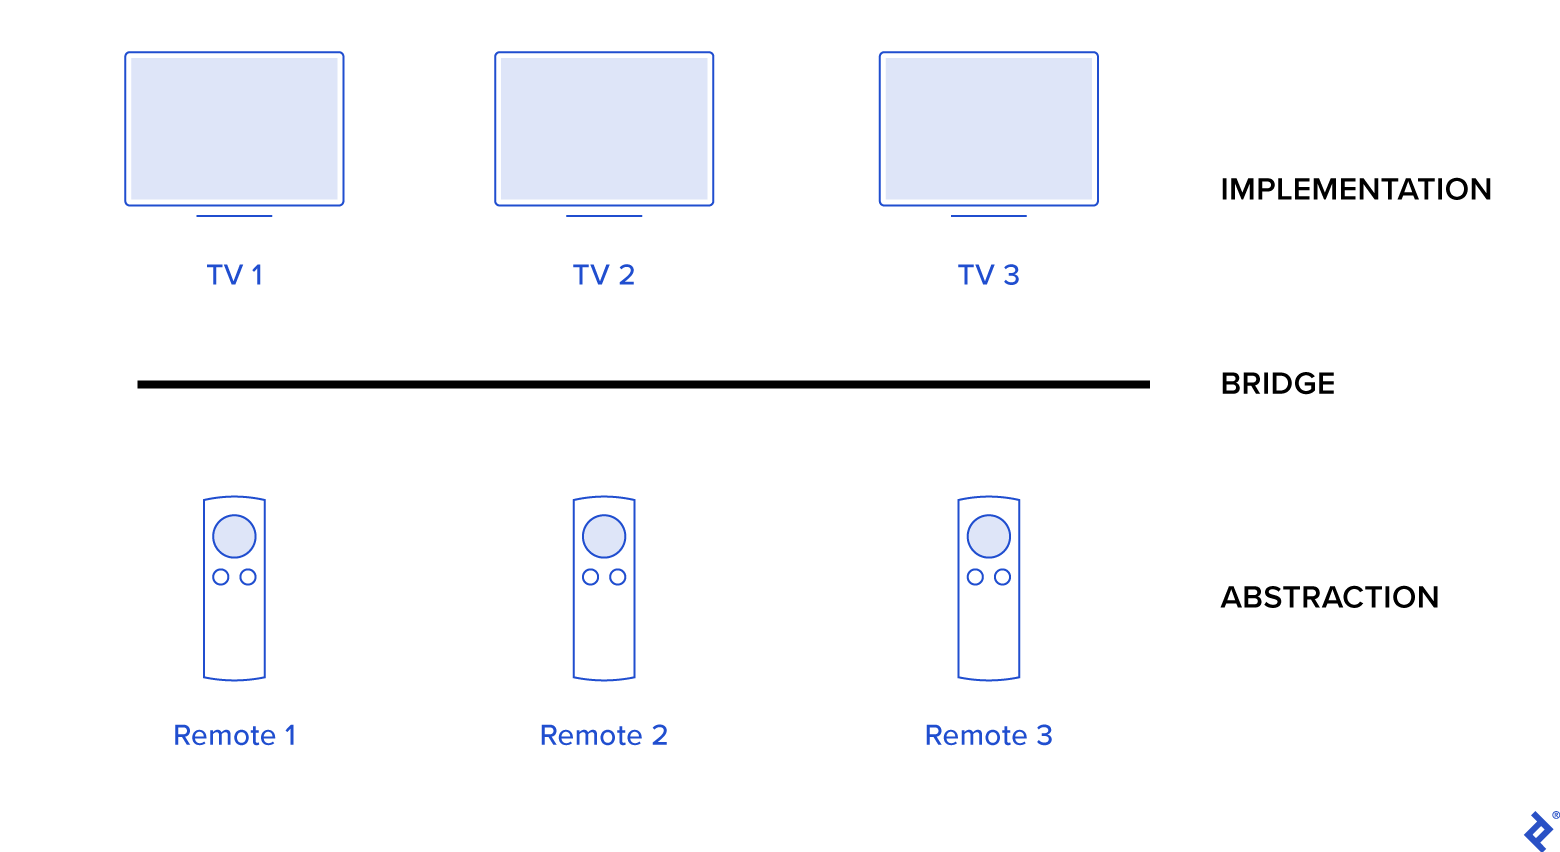 TV 1, TV 2, and TV 3 are at the top (Implementation), above a line labeled Bridge. Remote 1, Remote 2, and Remote 3  under the Bridge line are labeled Abstraction.